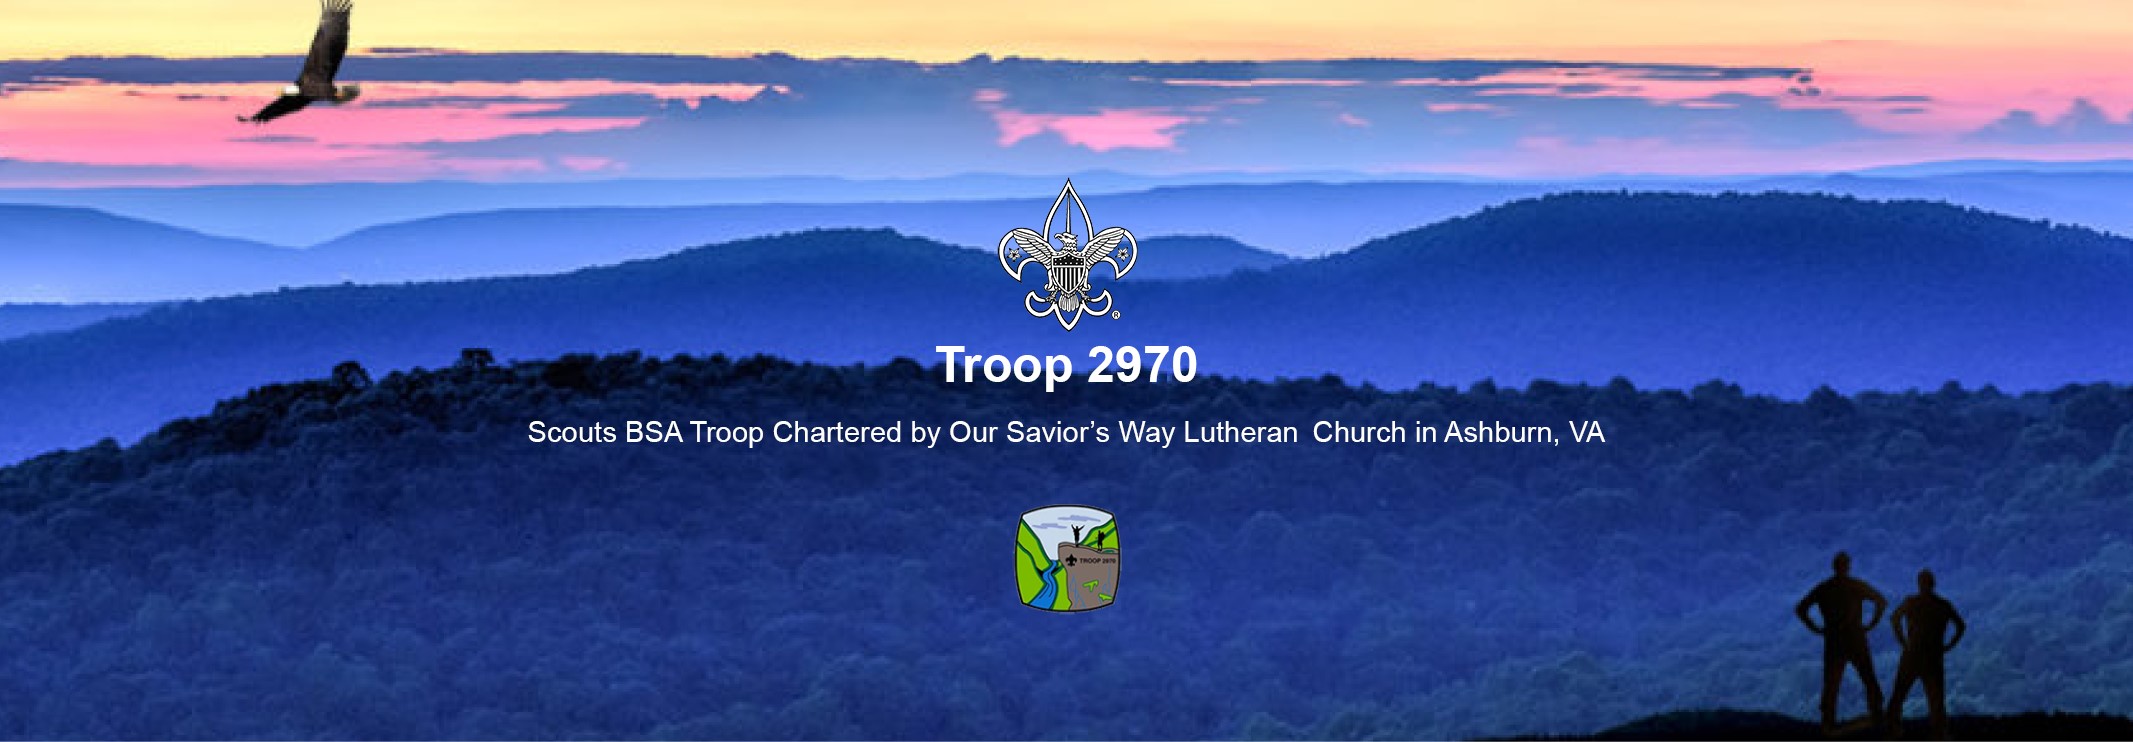 Scouts BSA Troop 2970 Sponsored by Our Saviors Way Lutheran Church in Ashburn, Virginia